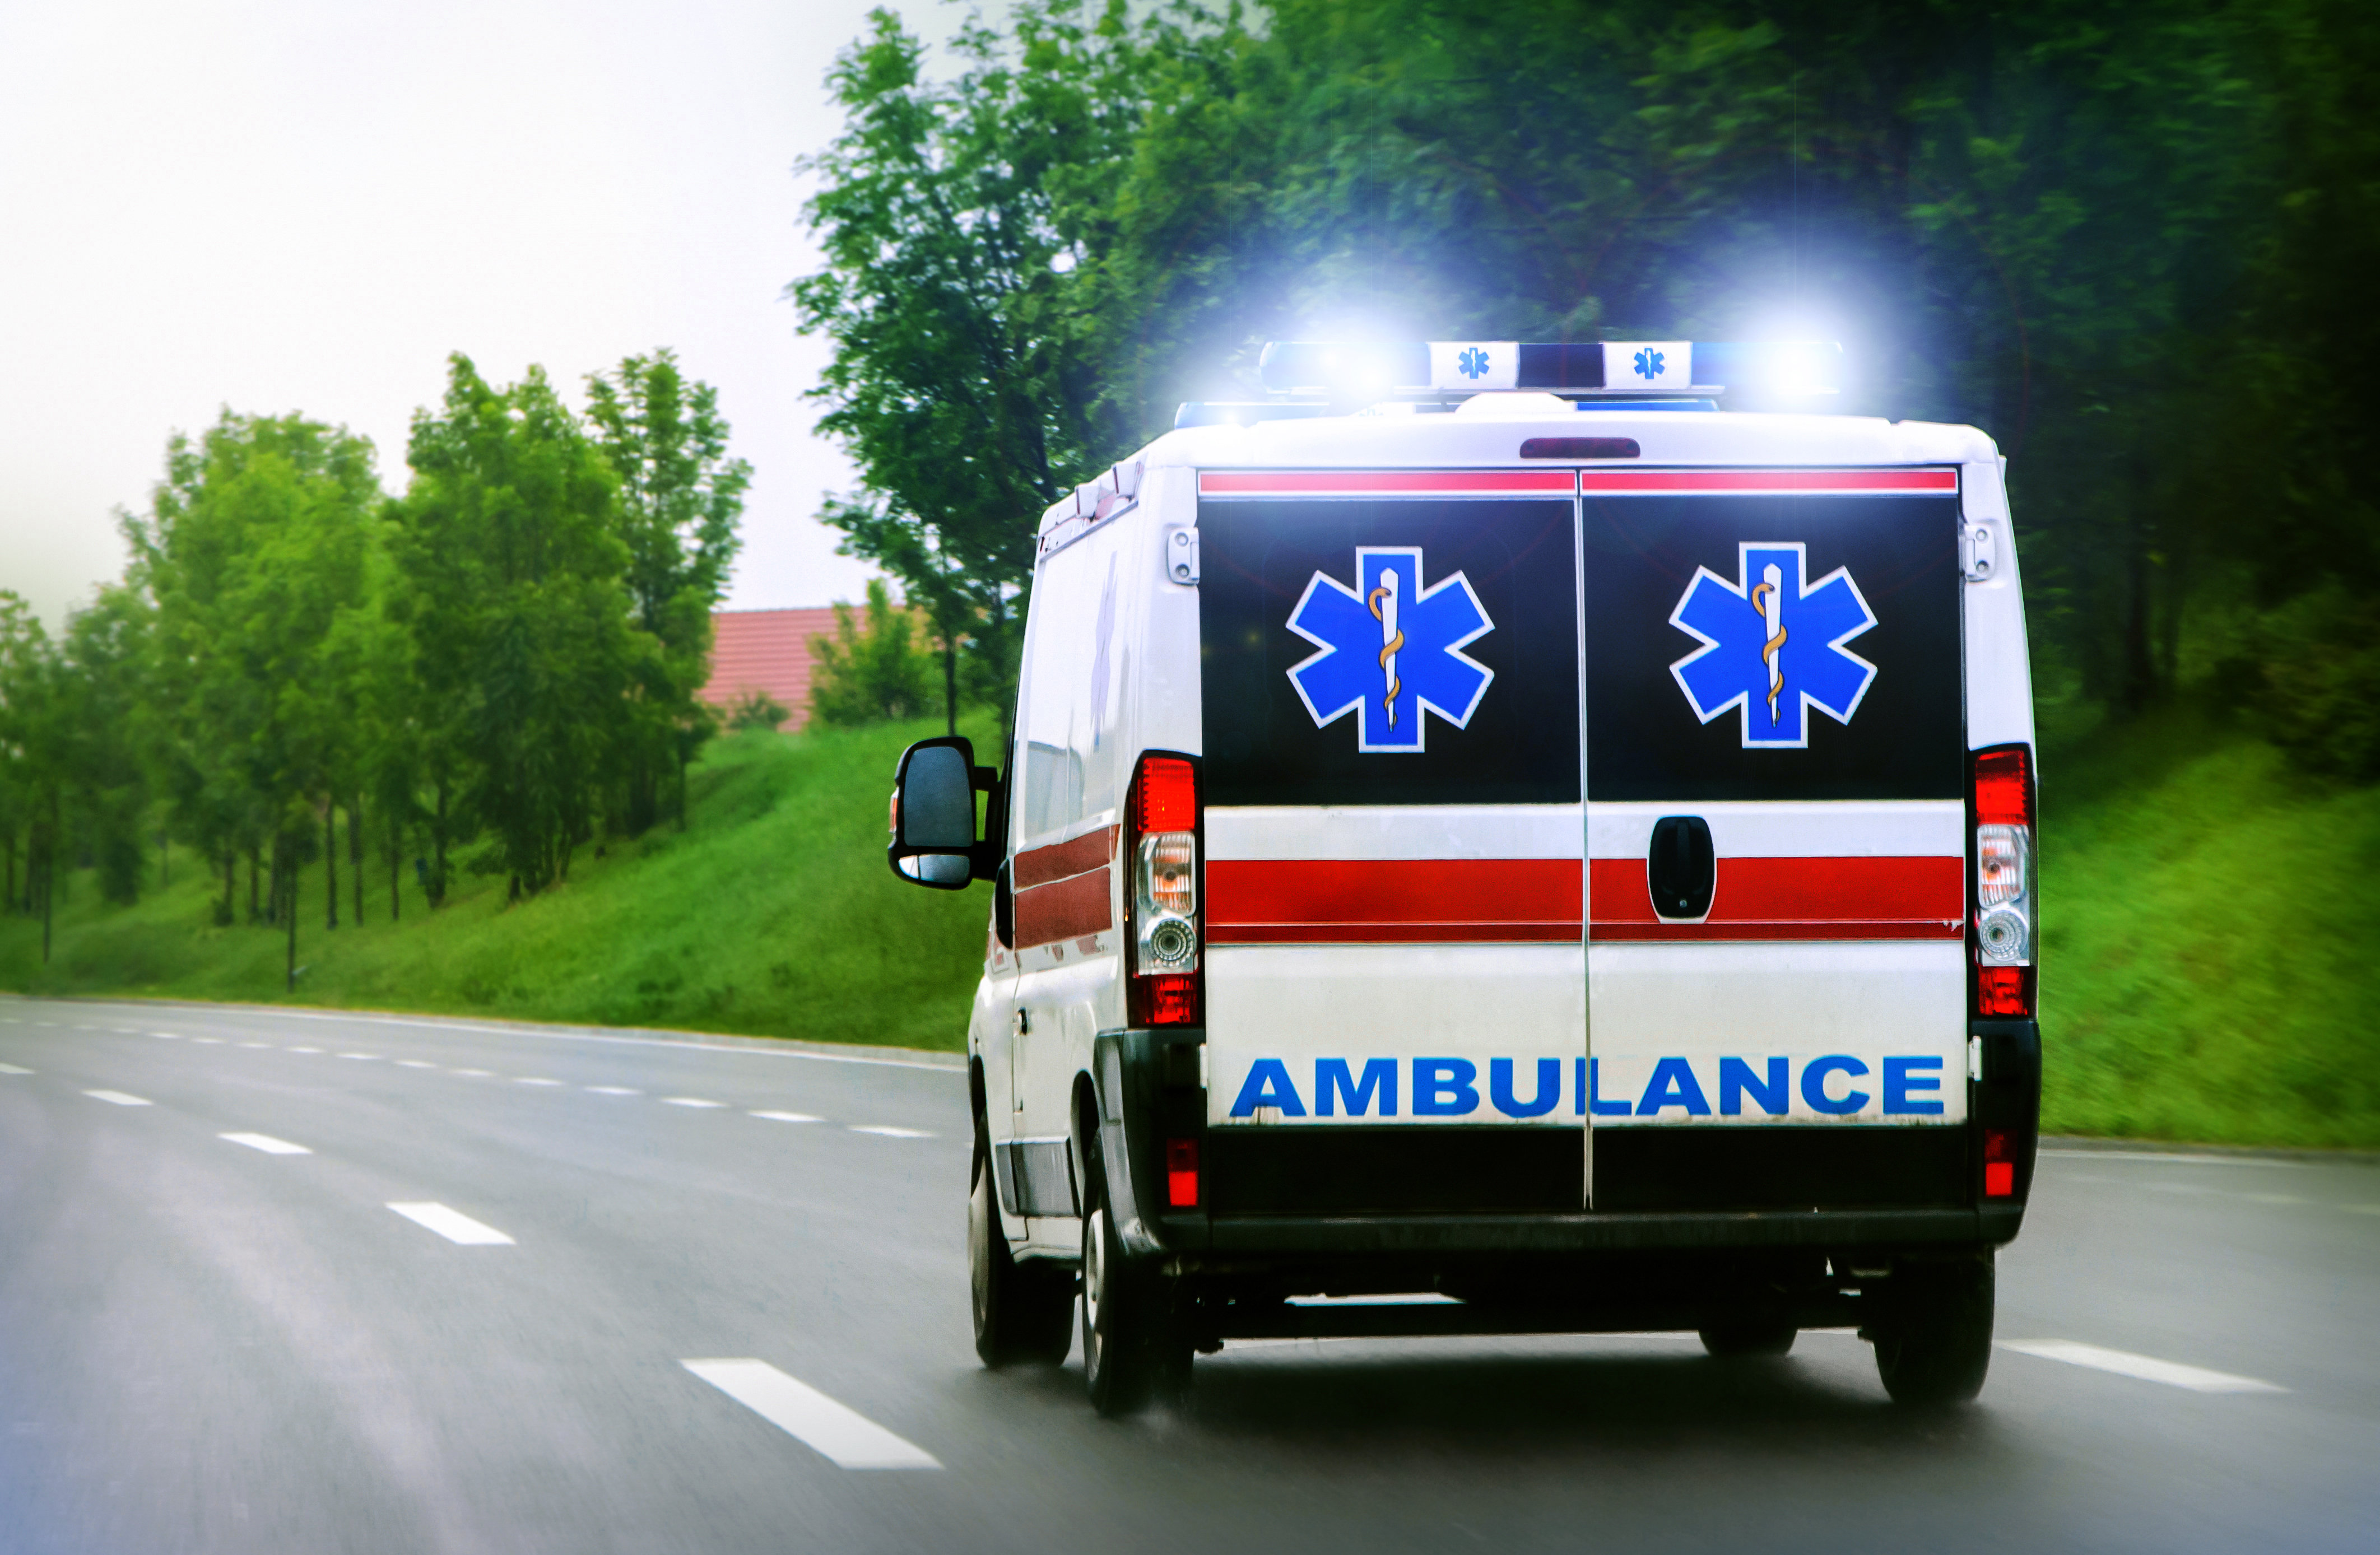 An ambulance on the road | Source: Shutterstock